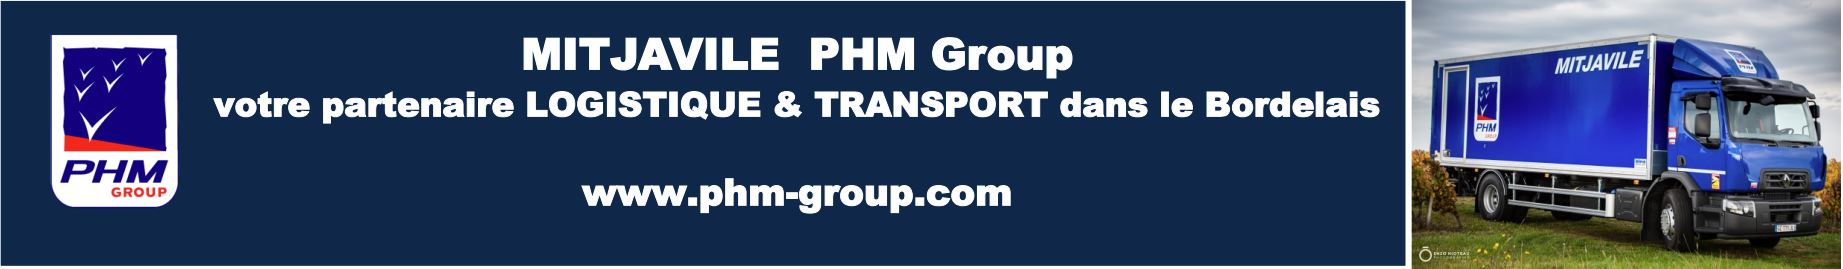 PHM Group